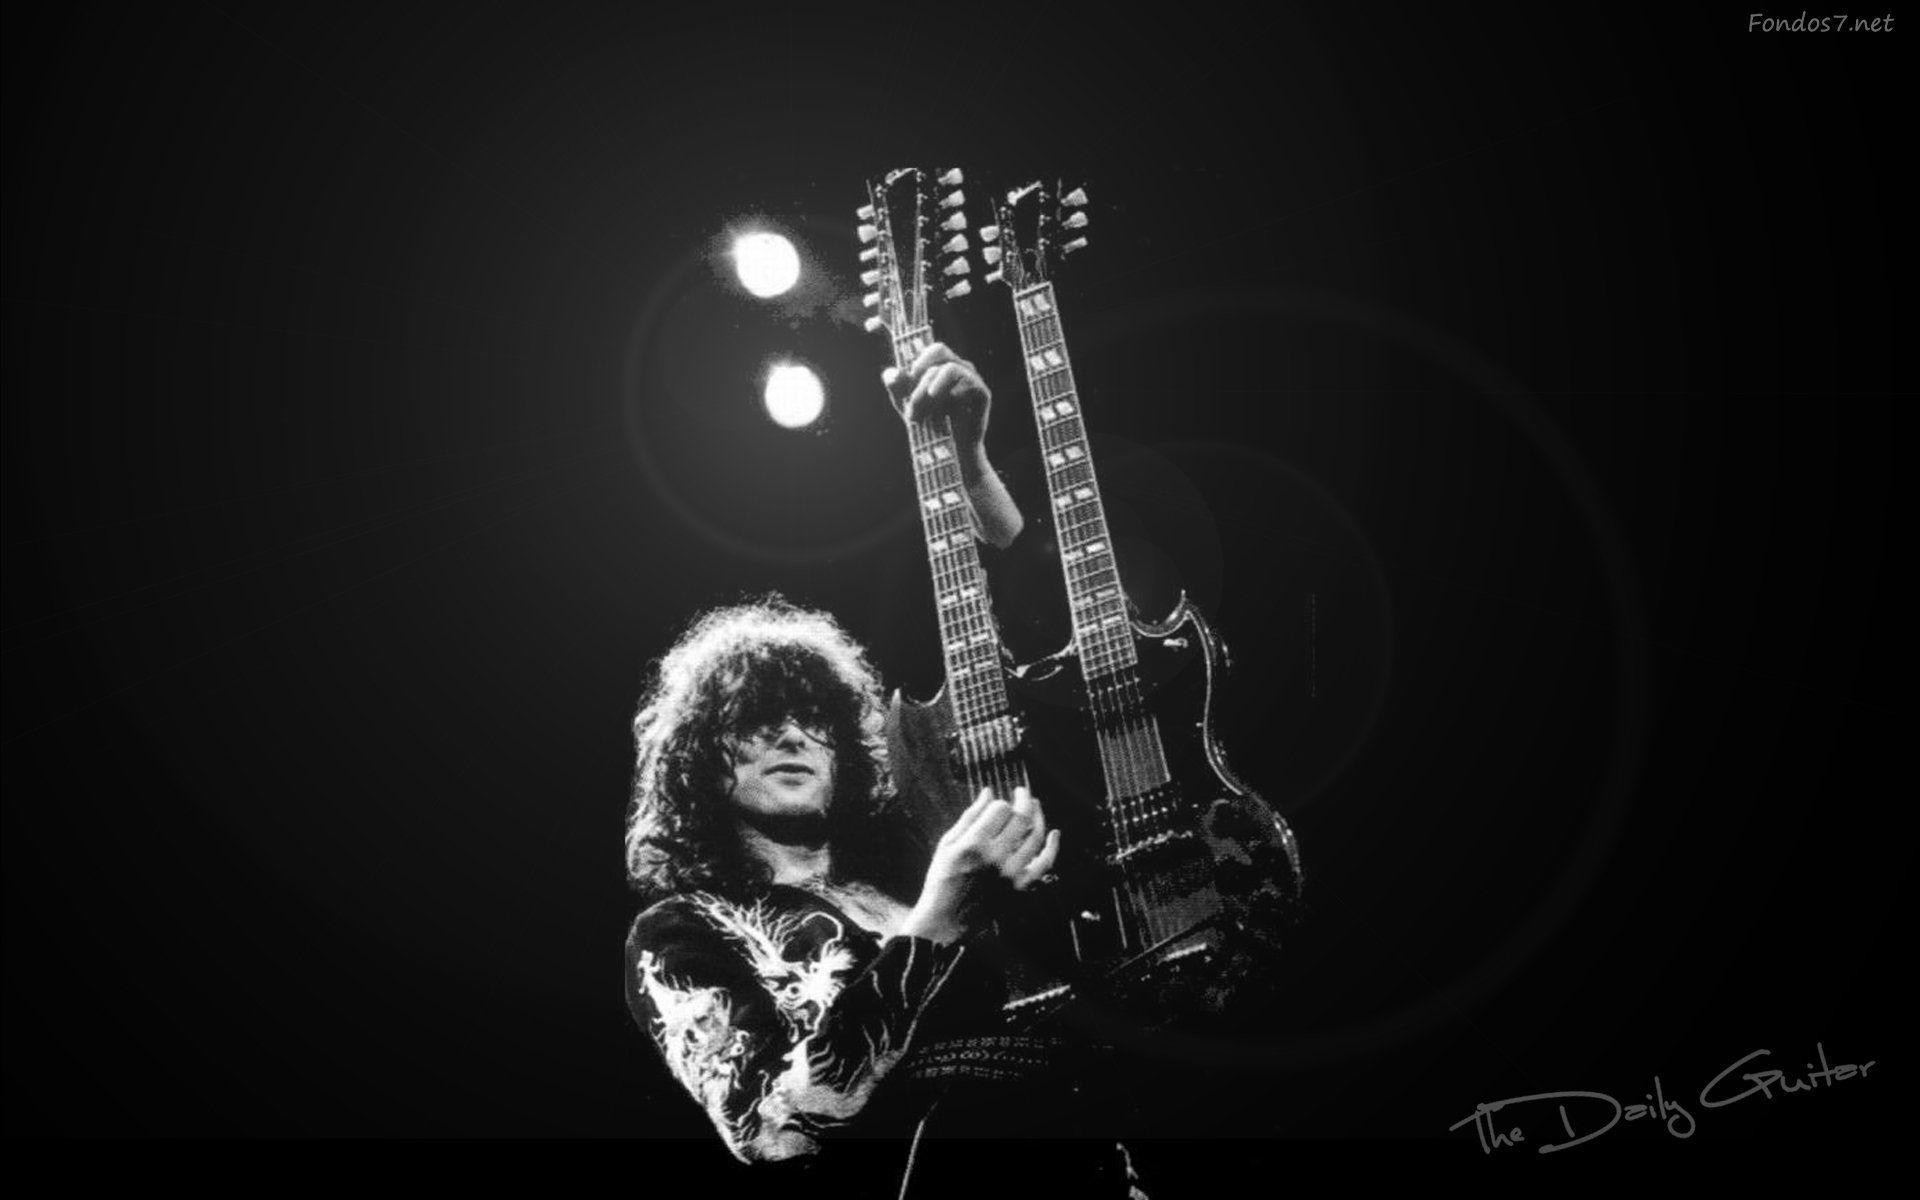 2048x1536, Gibson Les Paul Wallpaper - Jimmy Page , HD Wallpaper & Backgrounds